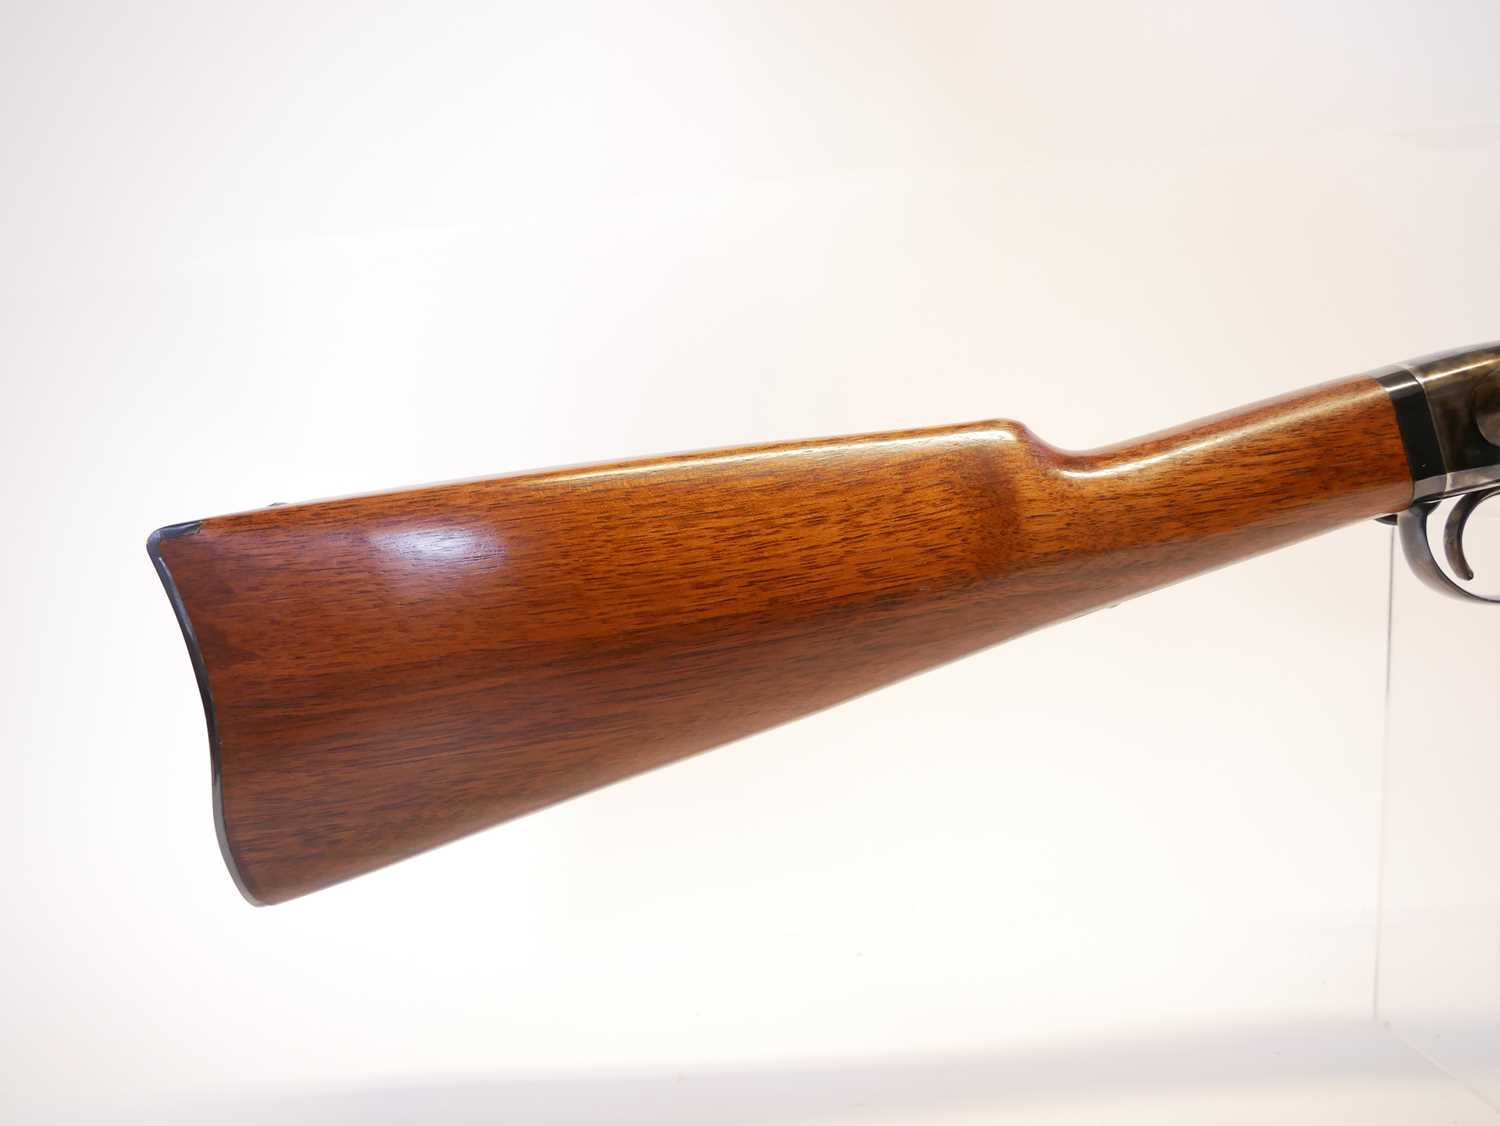 Pietta .50 cal Percussion capping breech loading Smith's carbine, serial number 3785, 21.5inch - Image 3 of 12